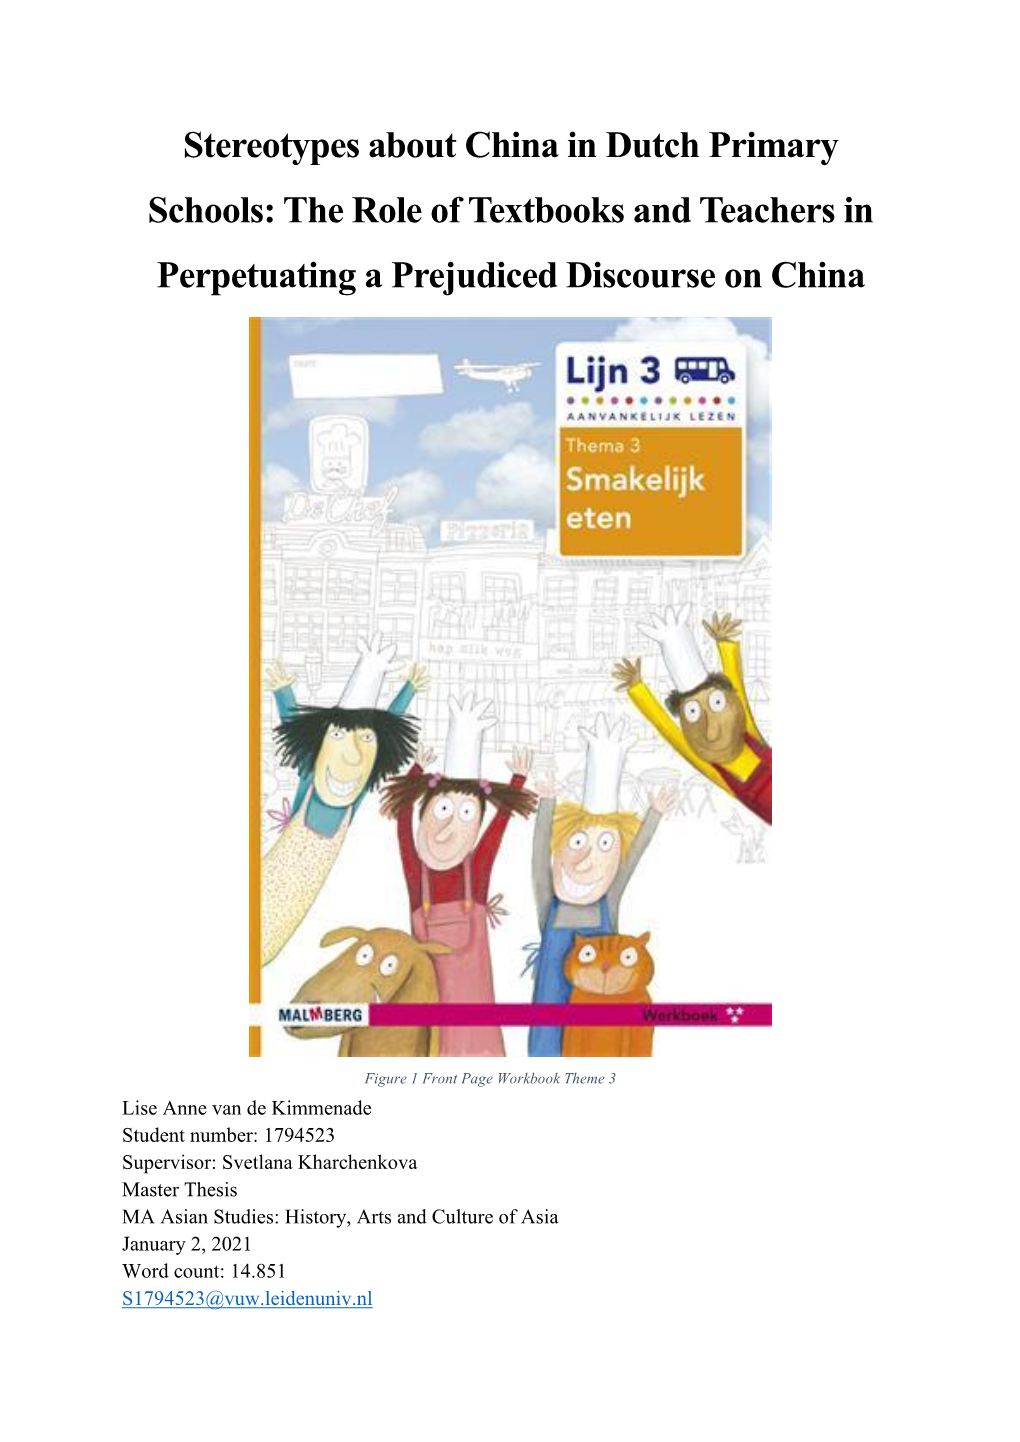 Stereotypes About China in Dutch Primary Schools: the Role of Textbooks and Teachers in Perpetuating a Prejudiced Discourse on China